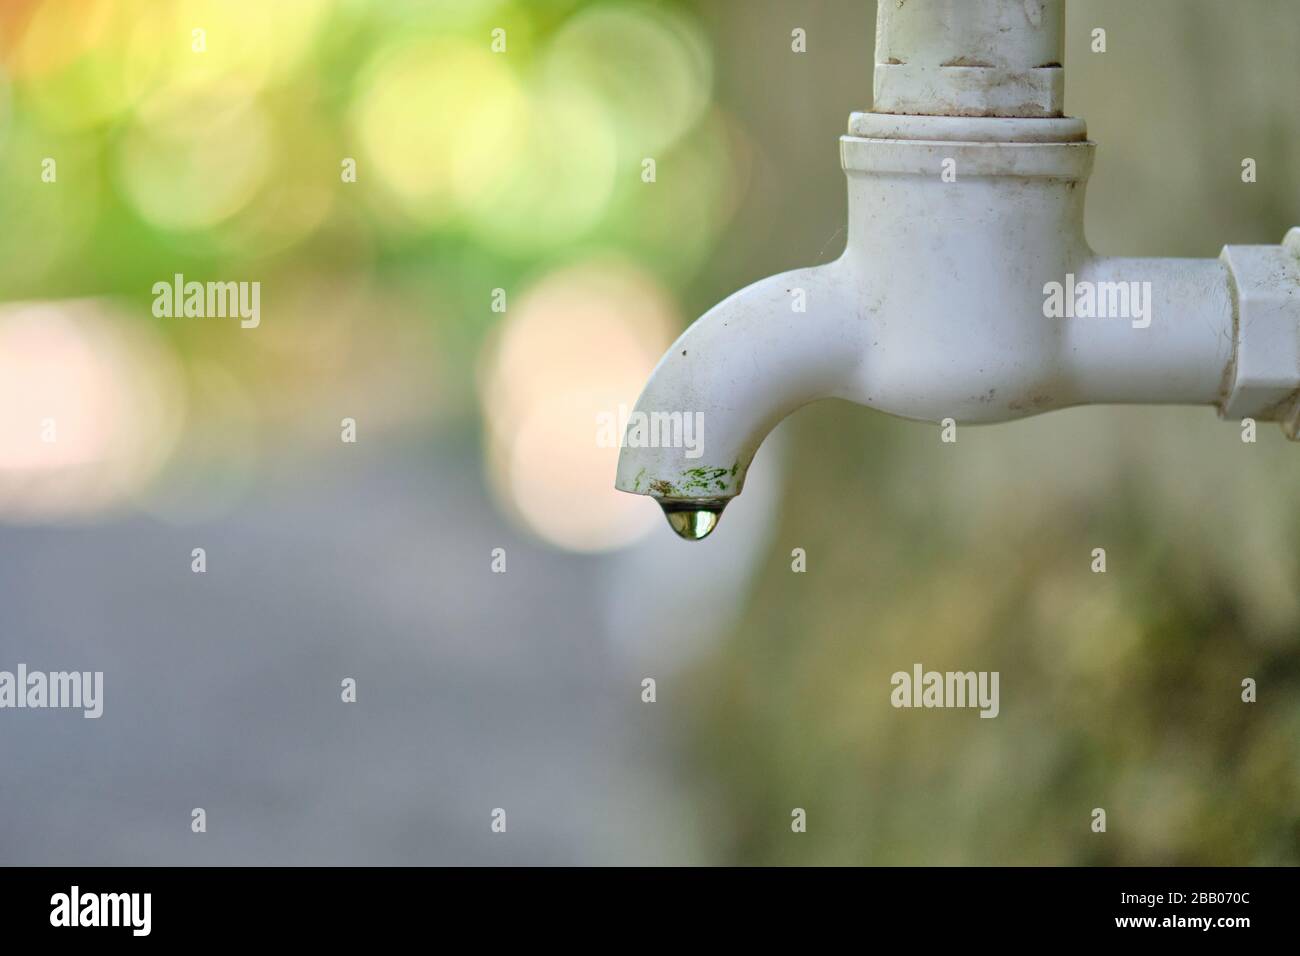 Dripping faucet in white close-up against the background of a green garden. Stock Photo